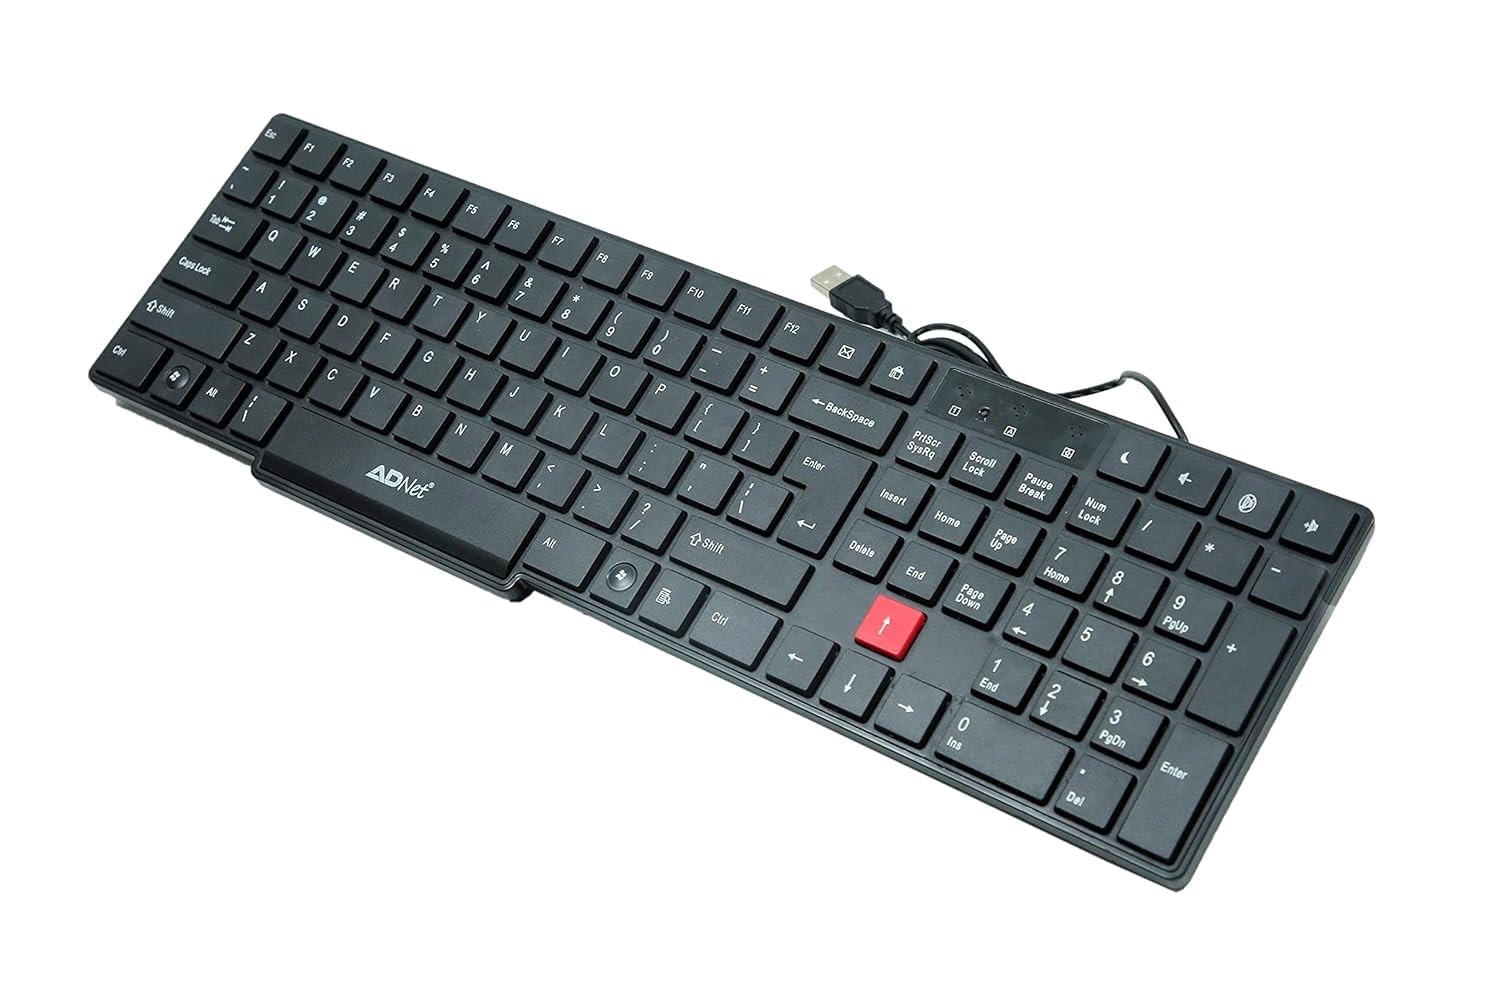 Adnet Keyboard, Wired, Black Colour, Pack of 1